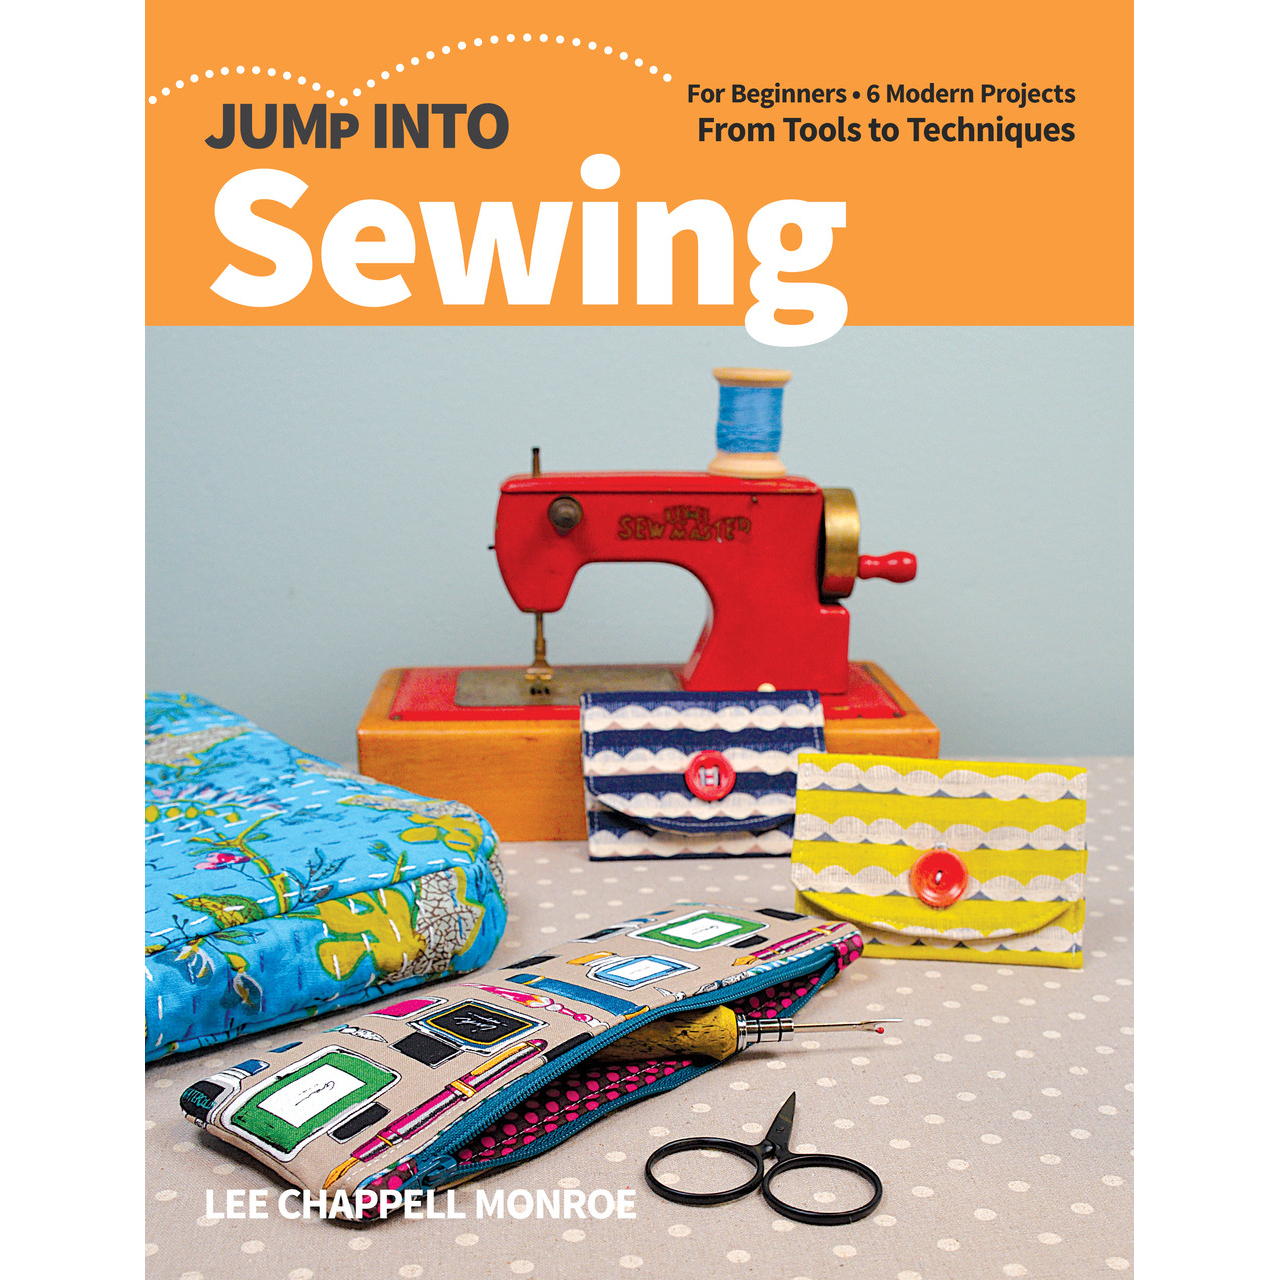 Jump into Sewing by Lee Chappell Monroe